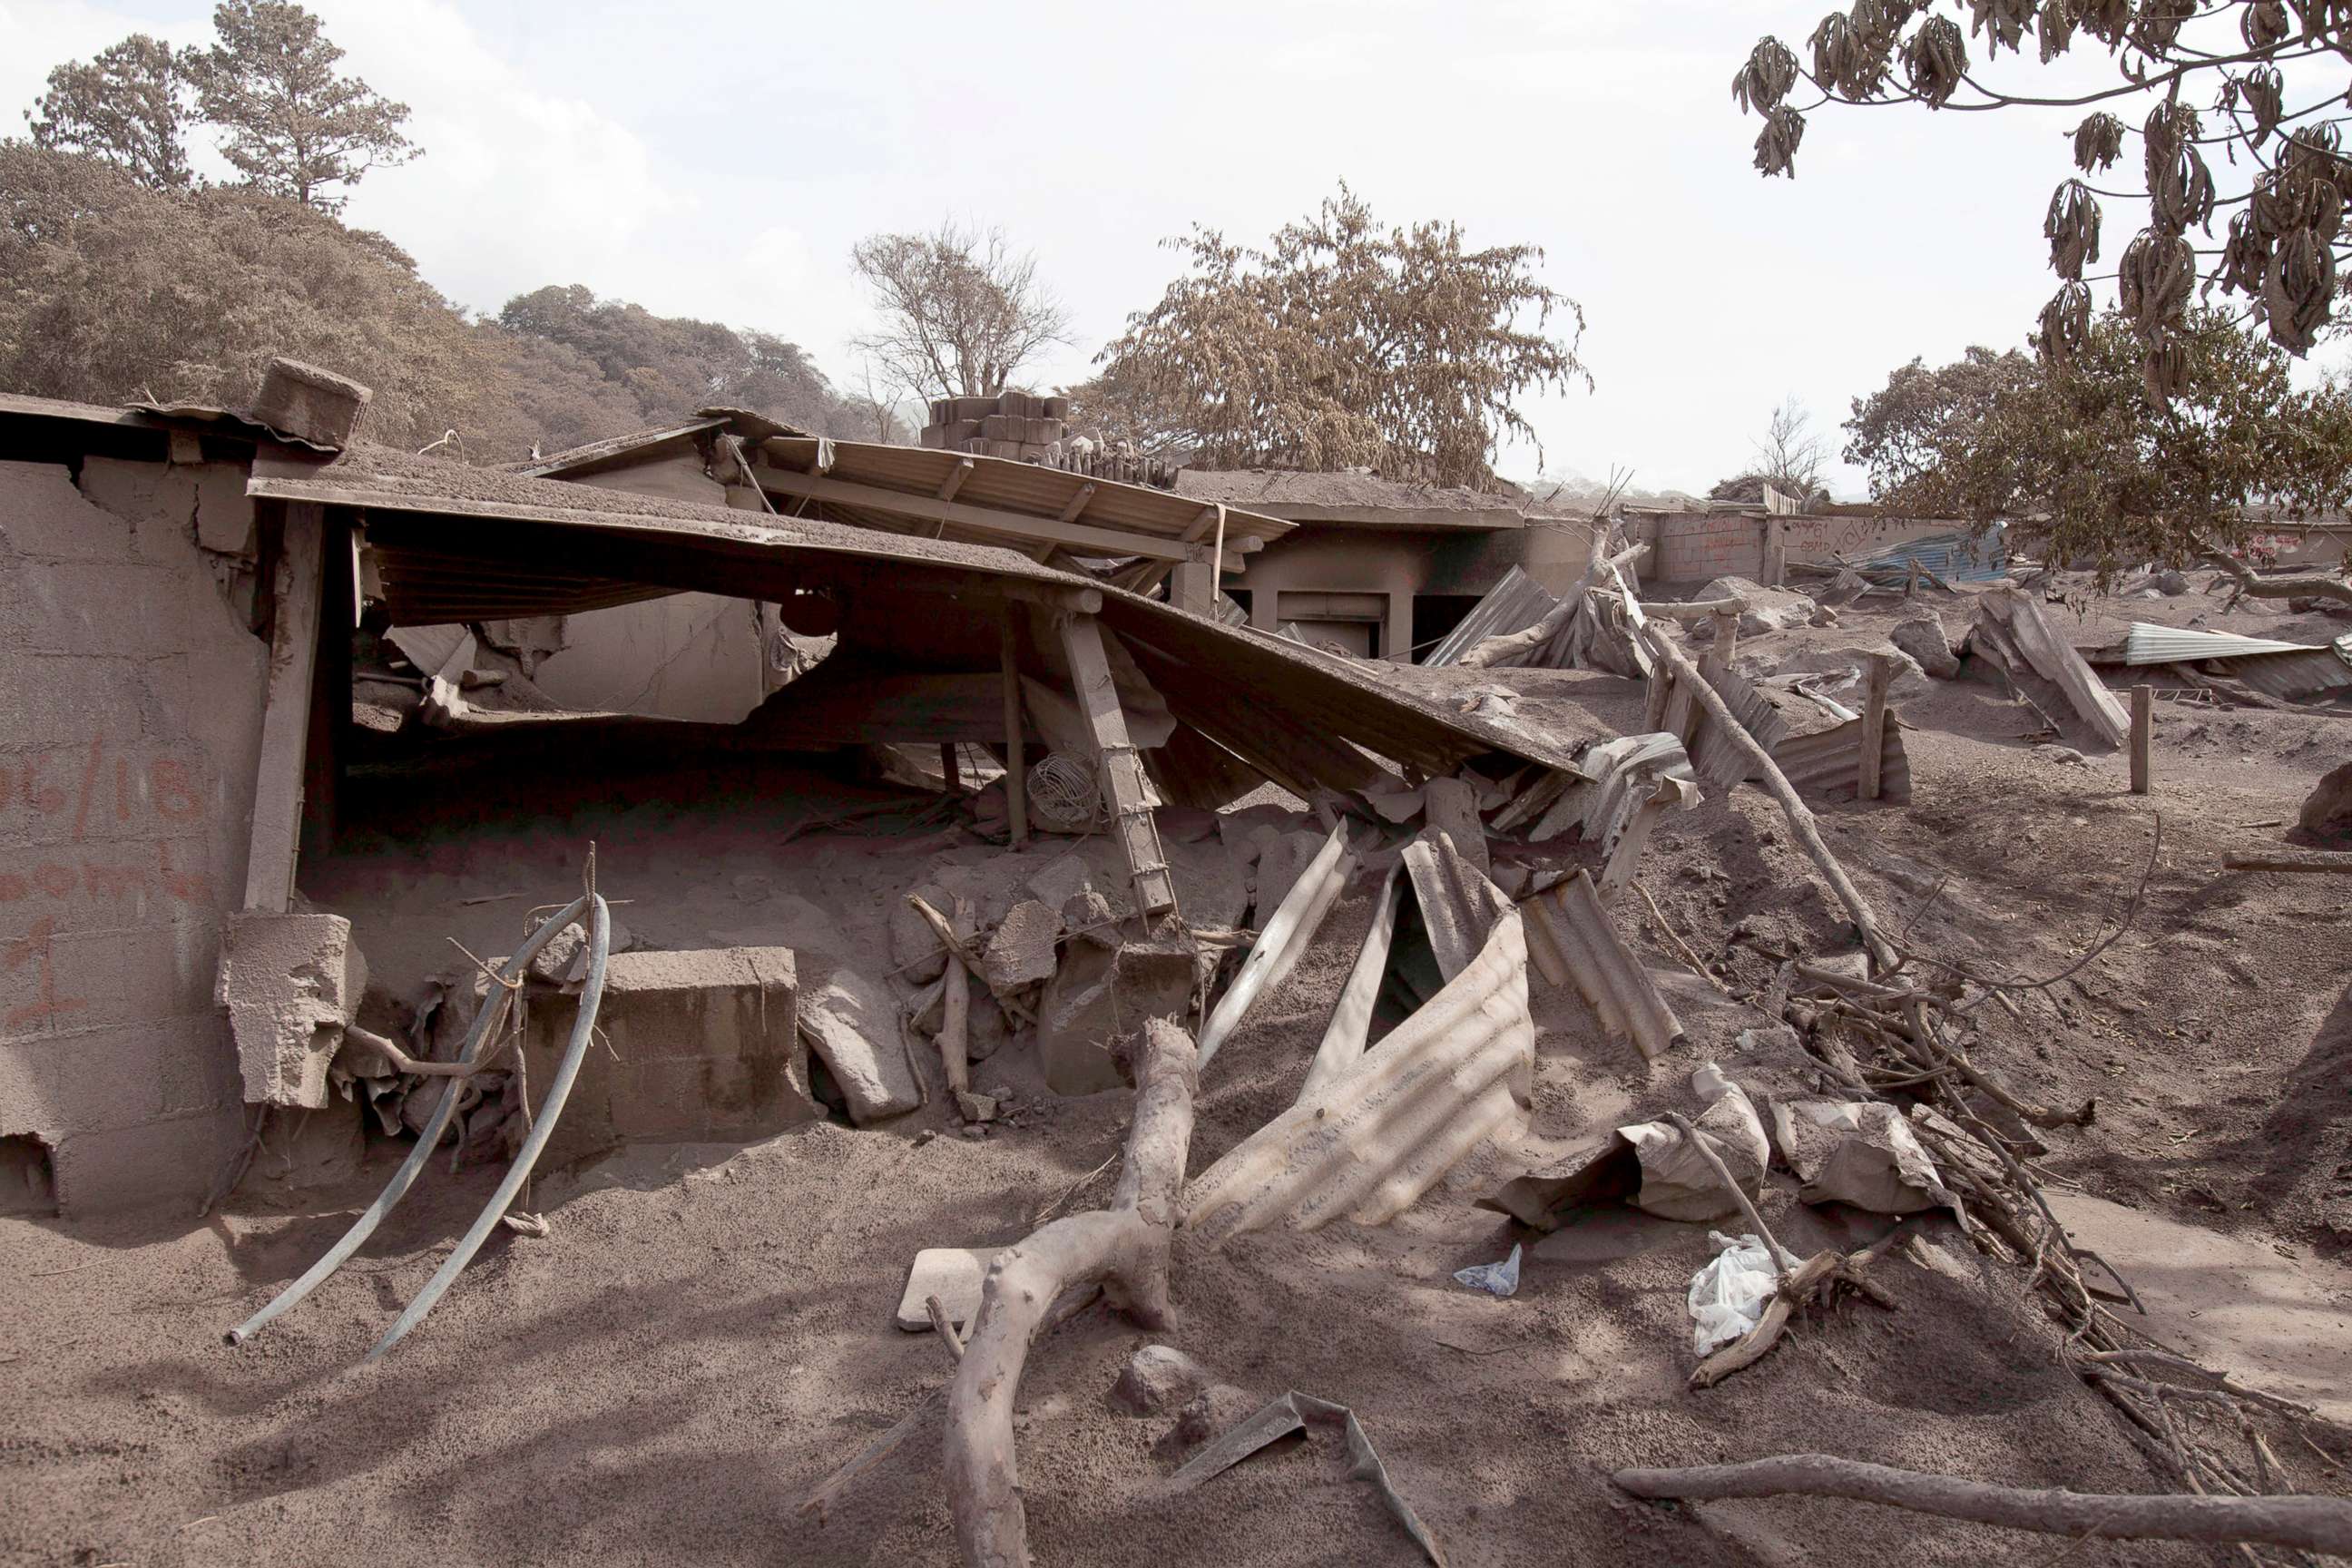 PHOTO: Volcanic ash blankets a home destroyed by the Volcan de Fuego, or "Volcano of Fire," eruption,  in Escuintla, Guatemala, June 6, 2018.